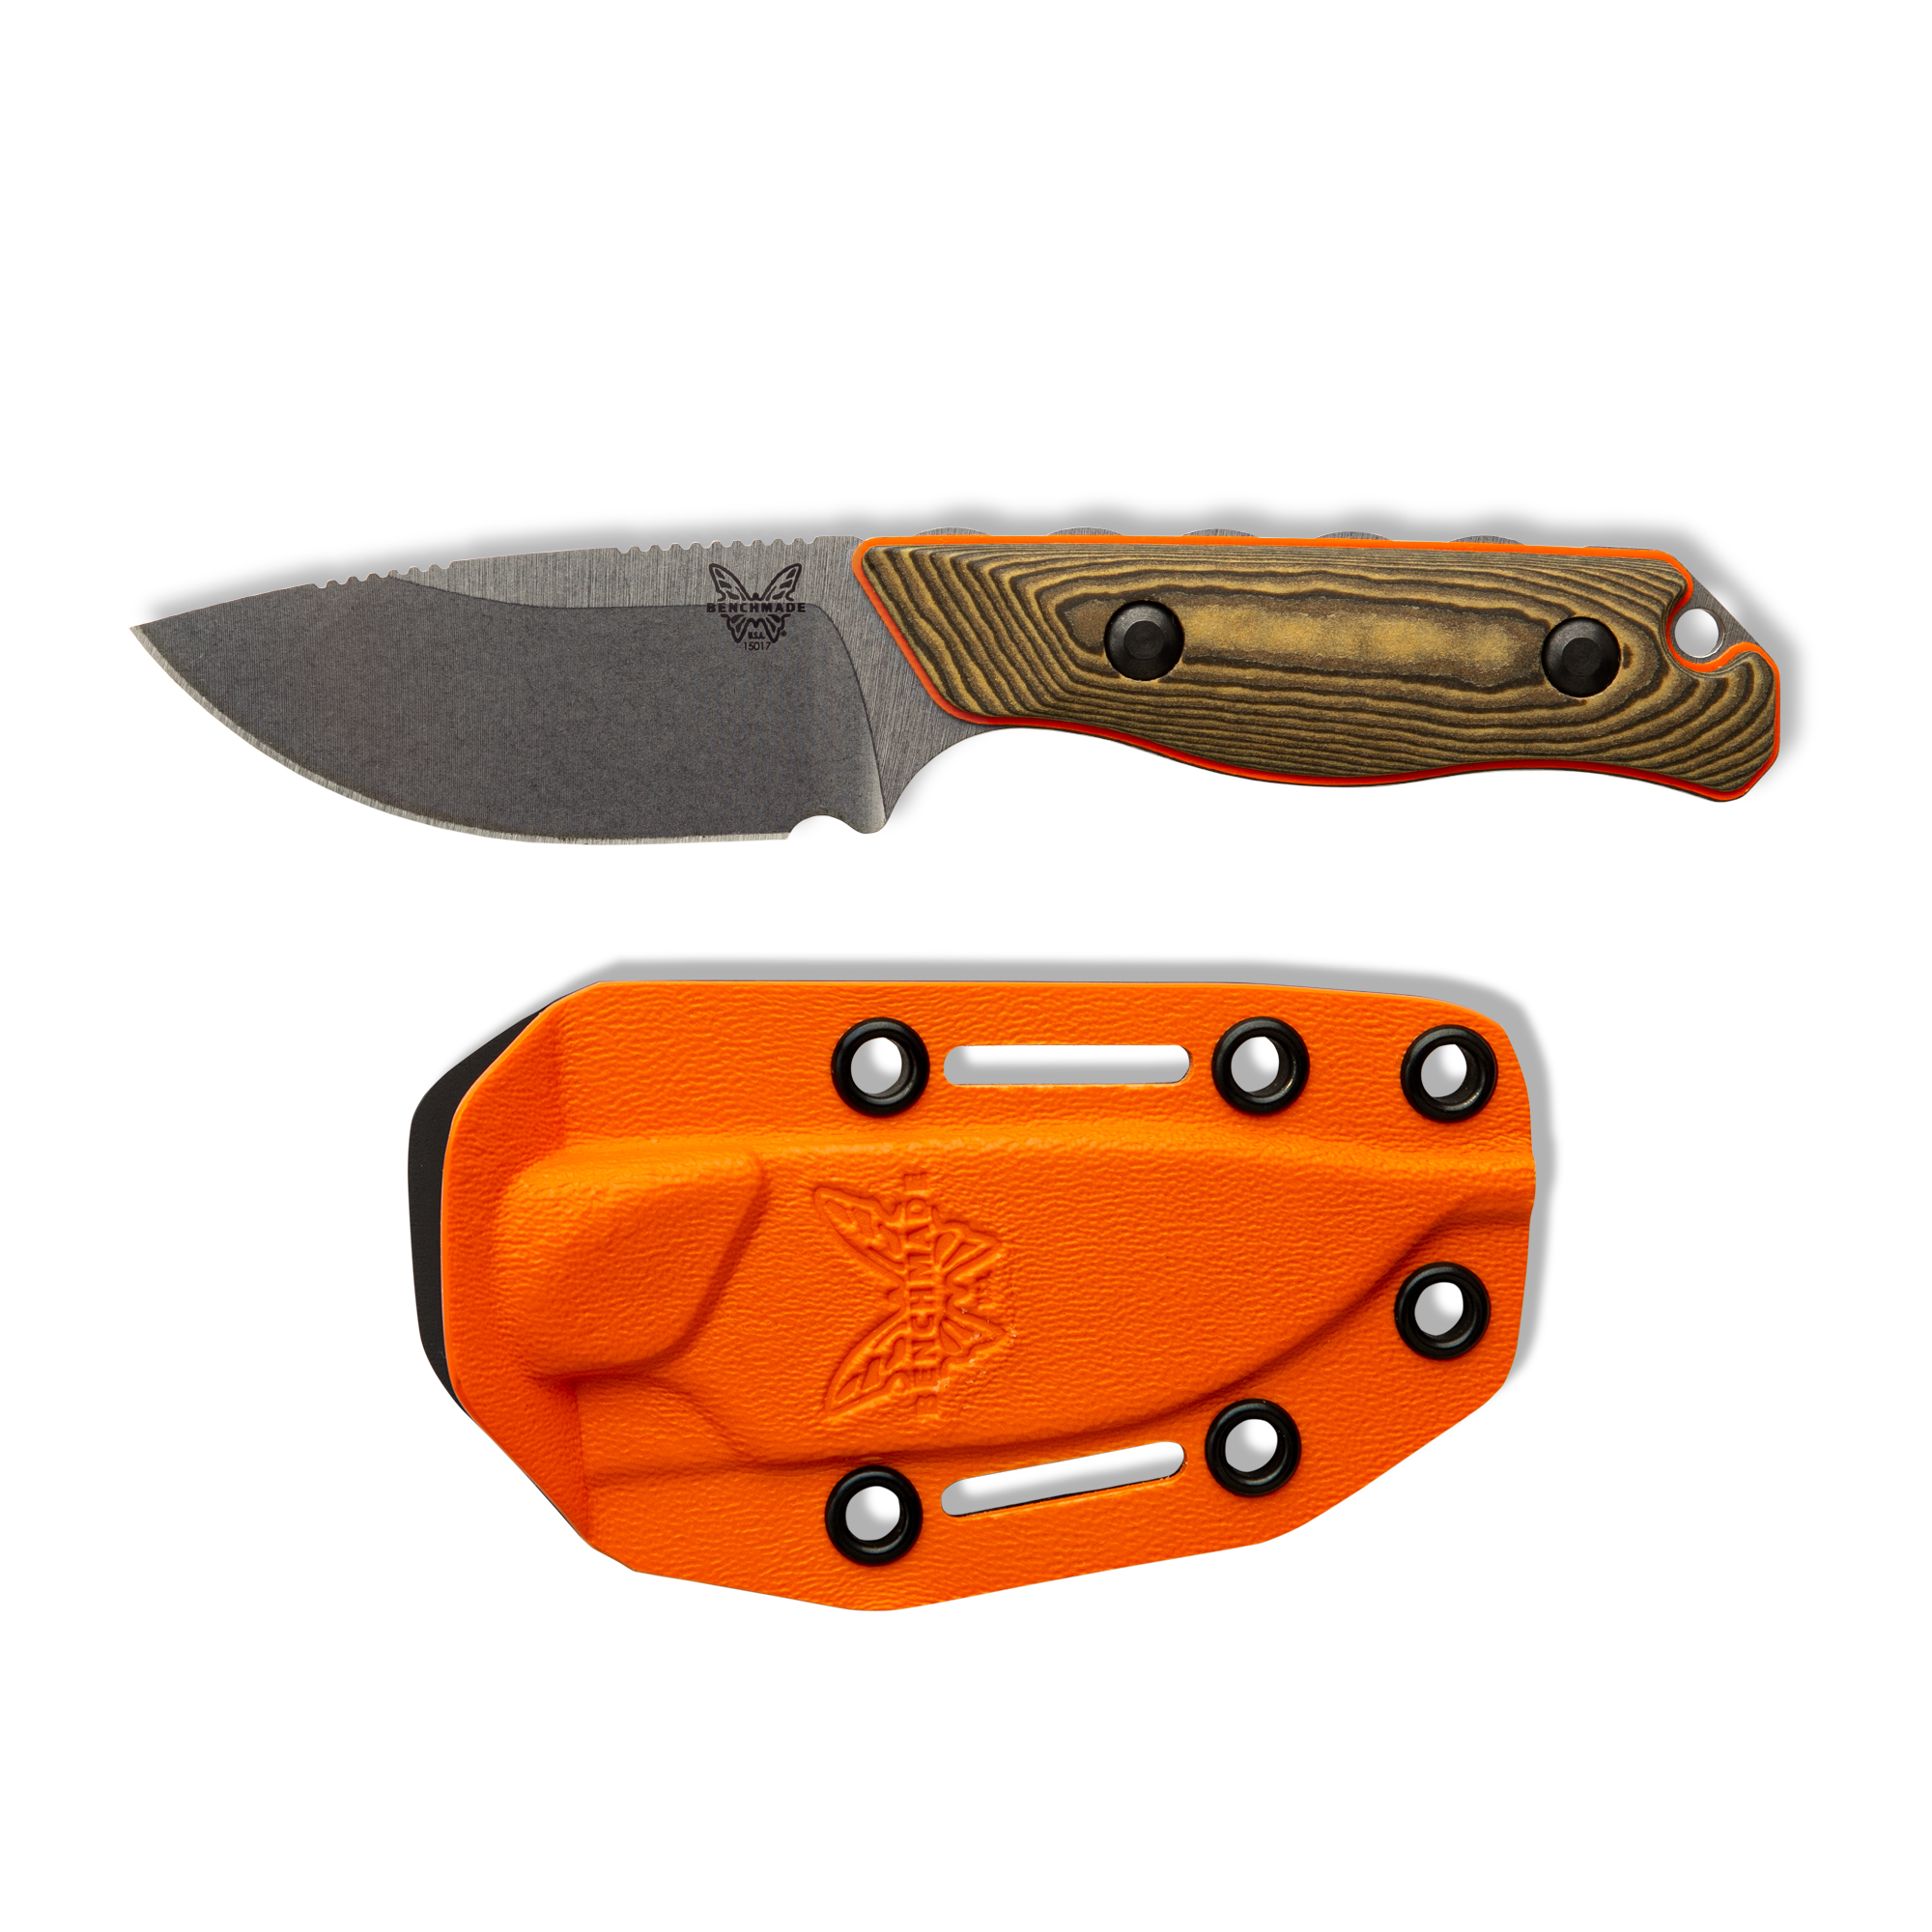 https://store.themeateater.com/on/demandware.static/-/Sites-meateater-master/default/dwf9c5c601/benchmade-hidden-canyon-hunter-knife/benchmade-hidden-canyon-hunter-knife_global_sheath.jpg